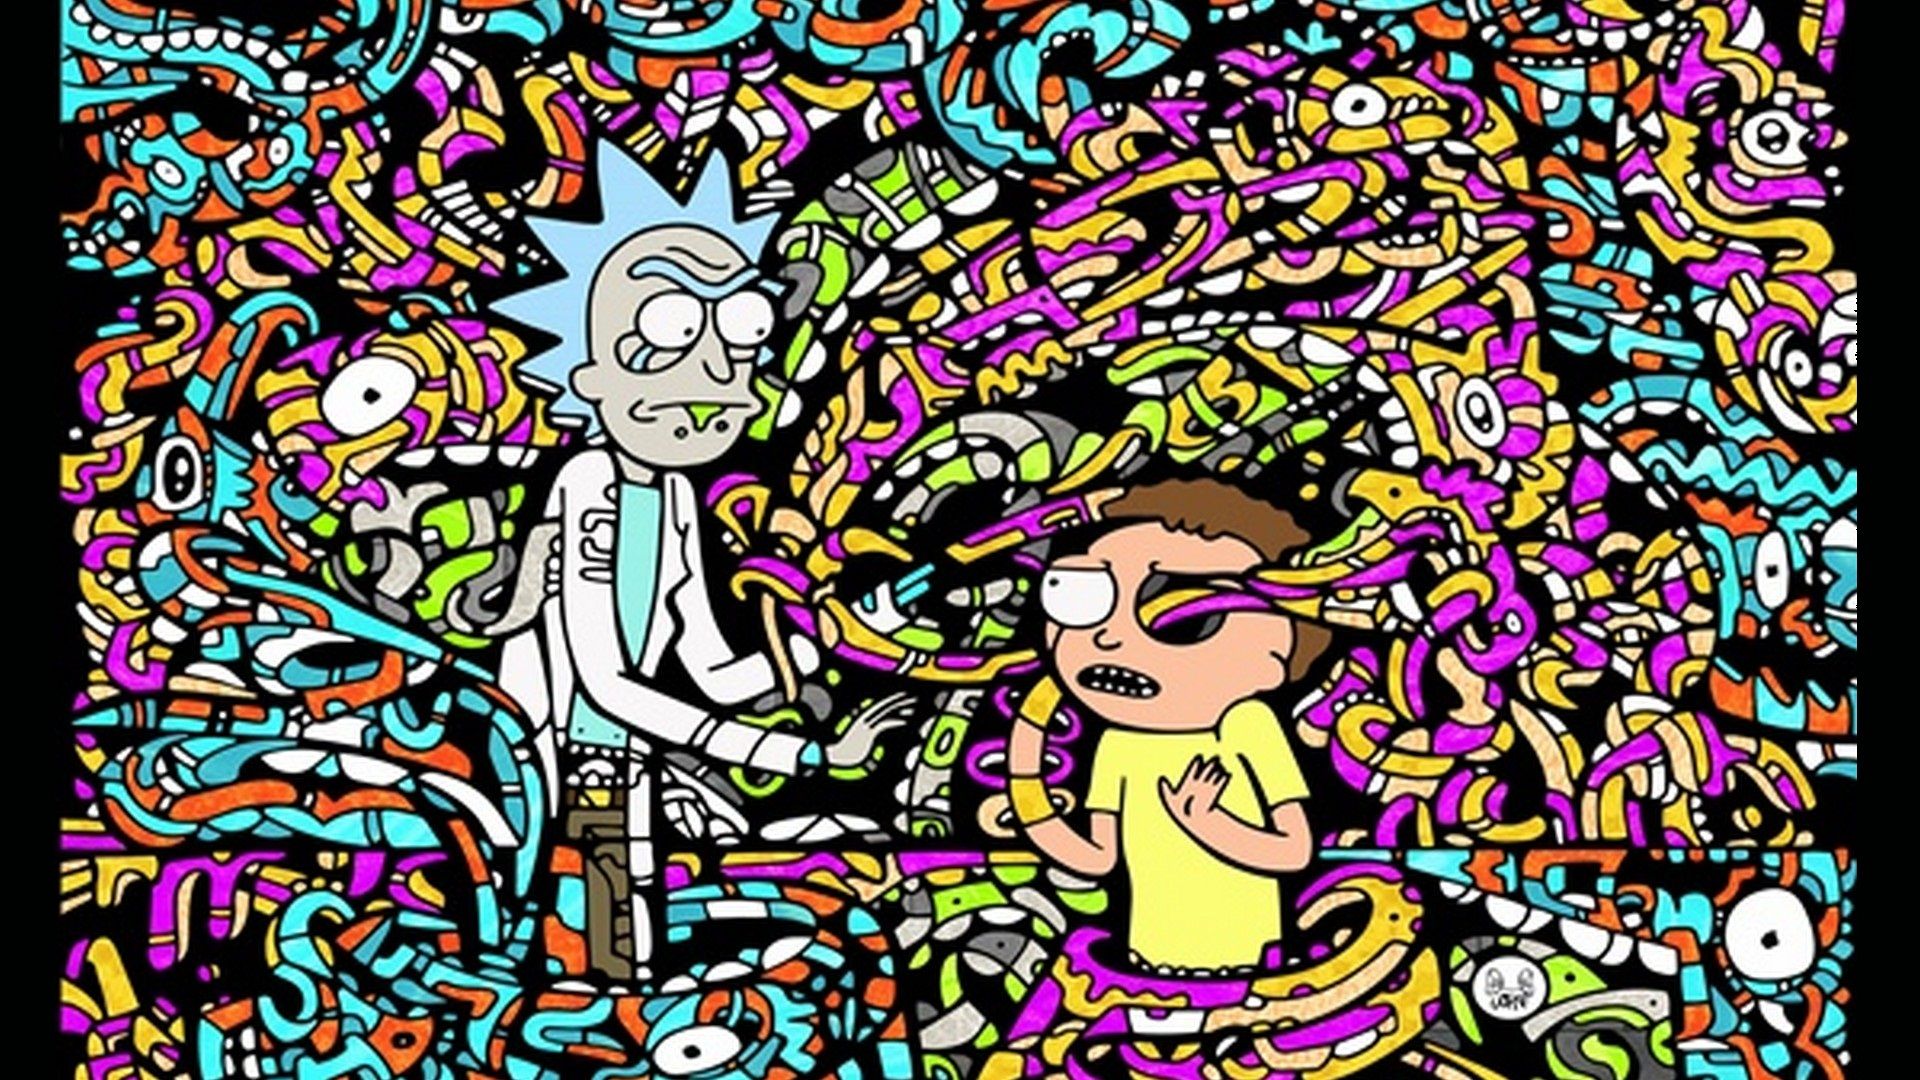 VISIT TO SEE BETTER QUALITY  Rick and morty stickers Iphone wallpaper rick  and morty Rick and morty drawing